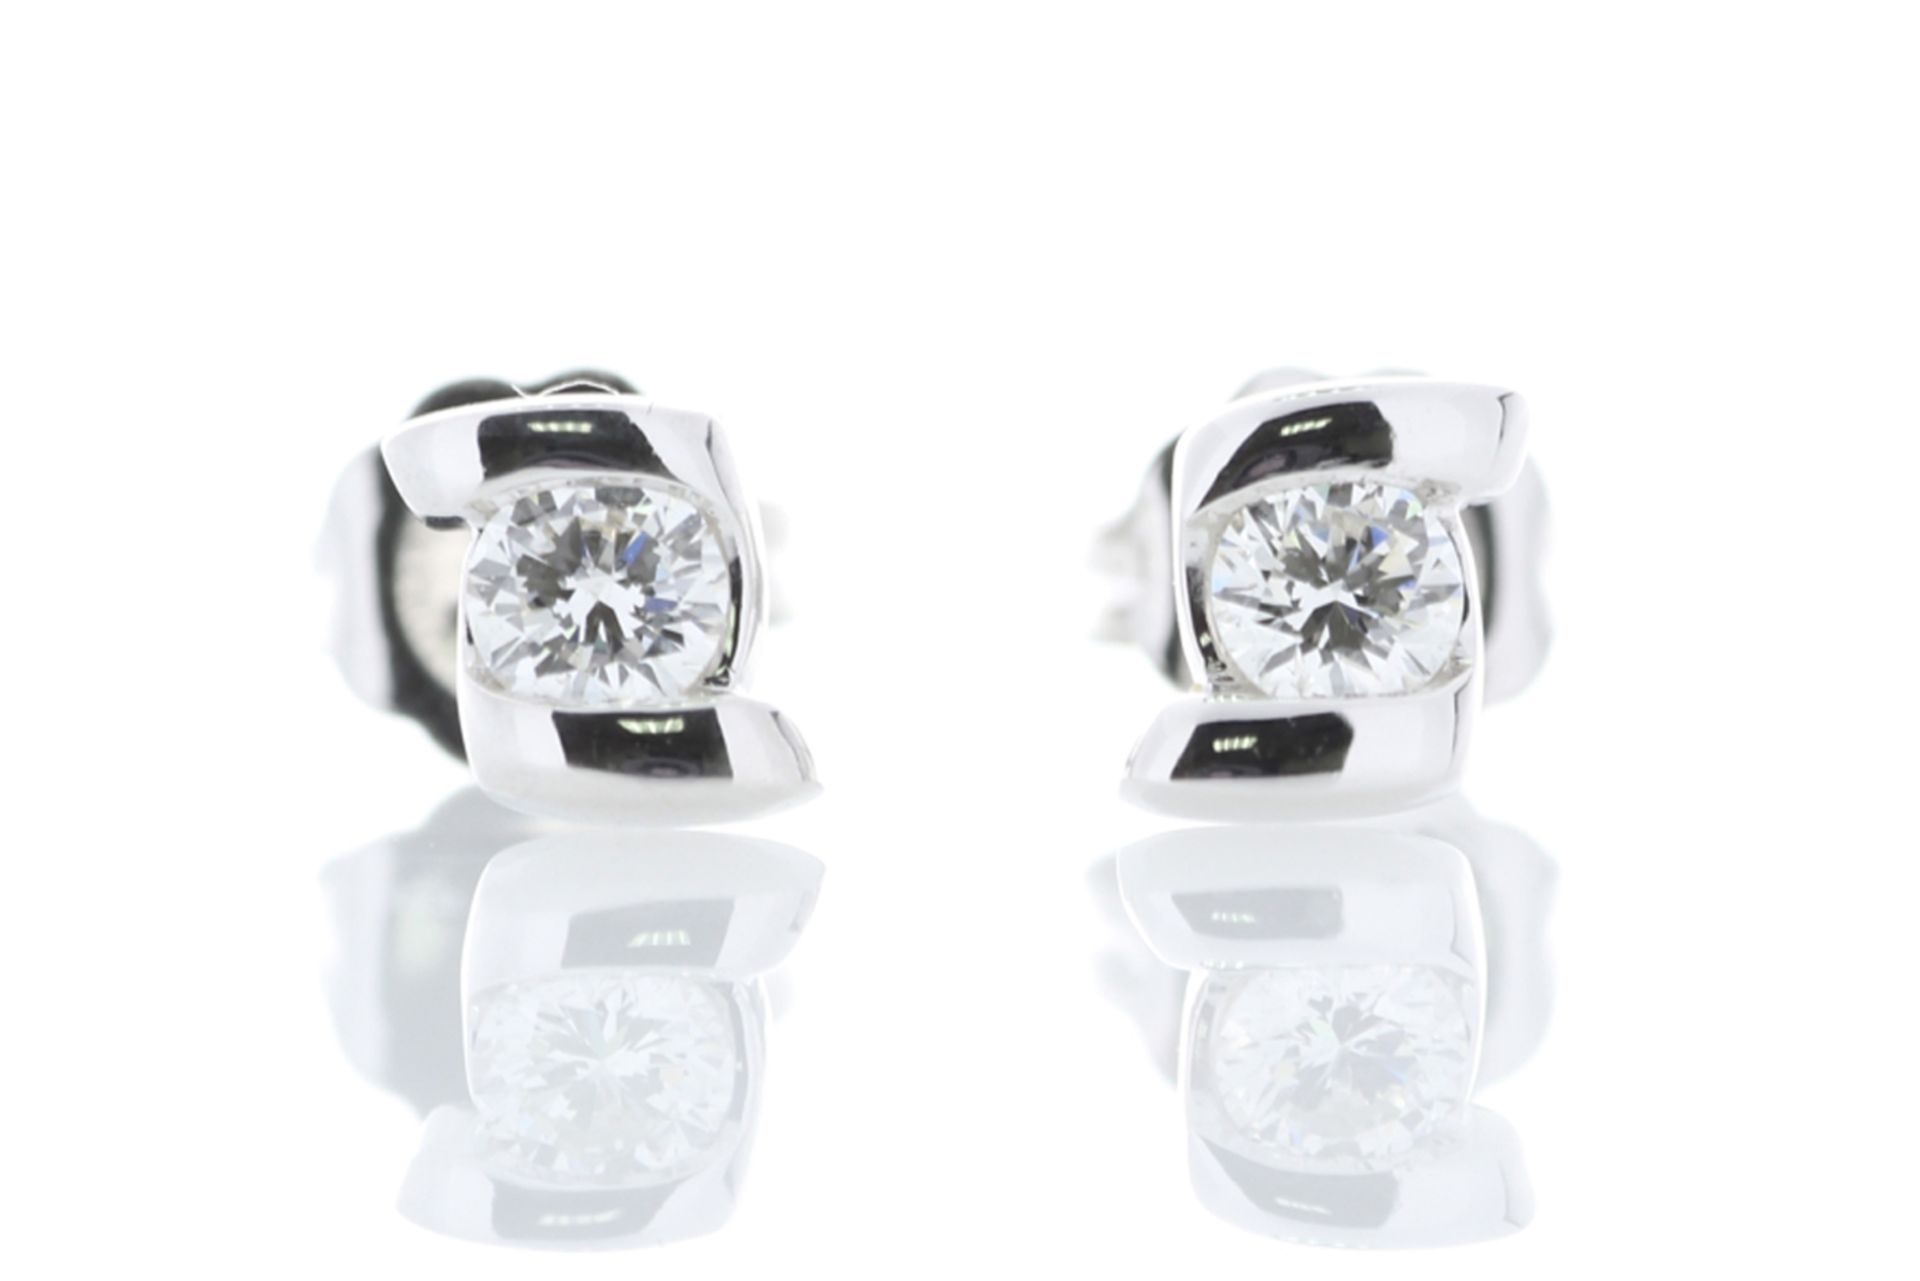 18ct White Gold Bar Set Diamond Earring 0.25 Carats - Valued By GIE £6,595.00 - A beautiful round